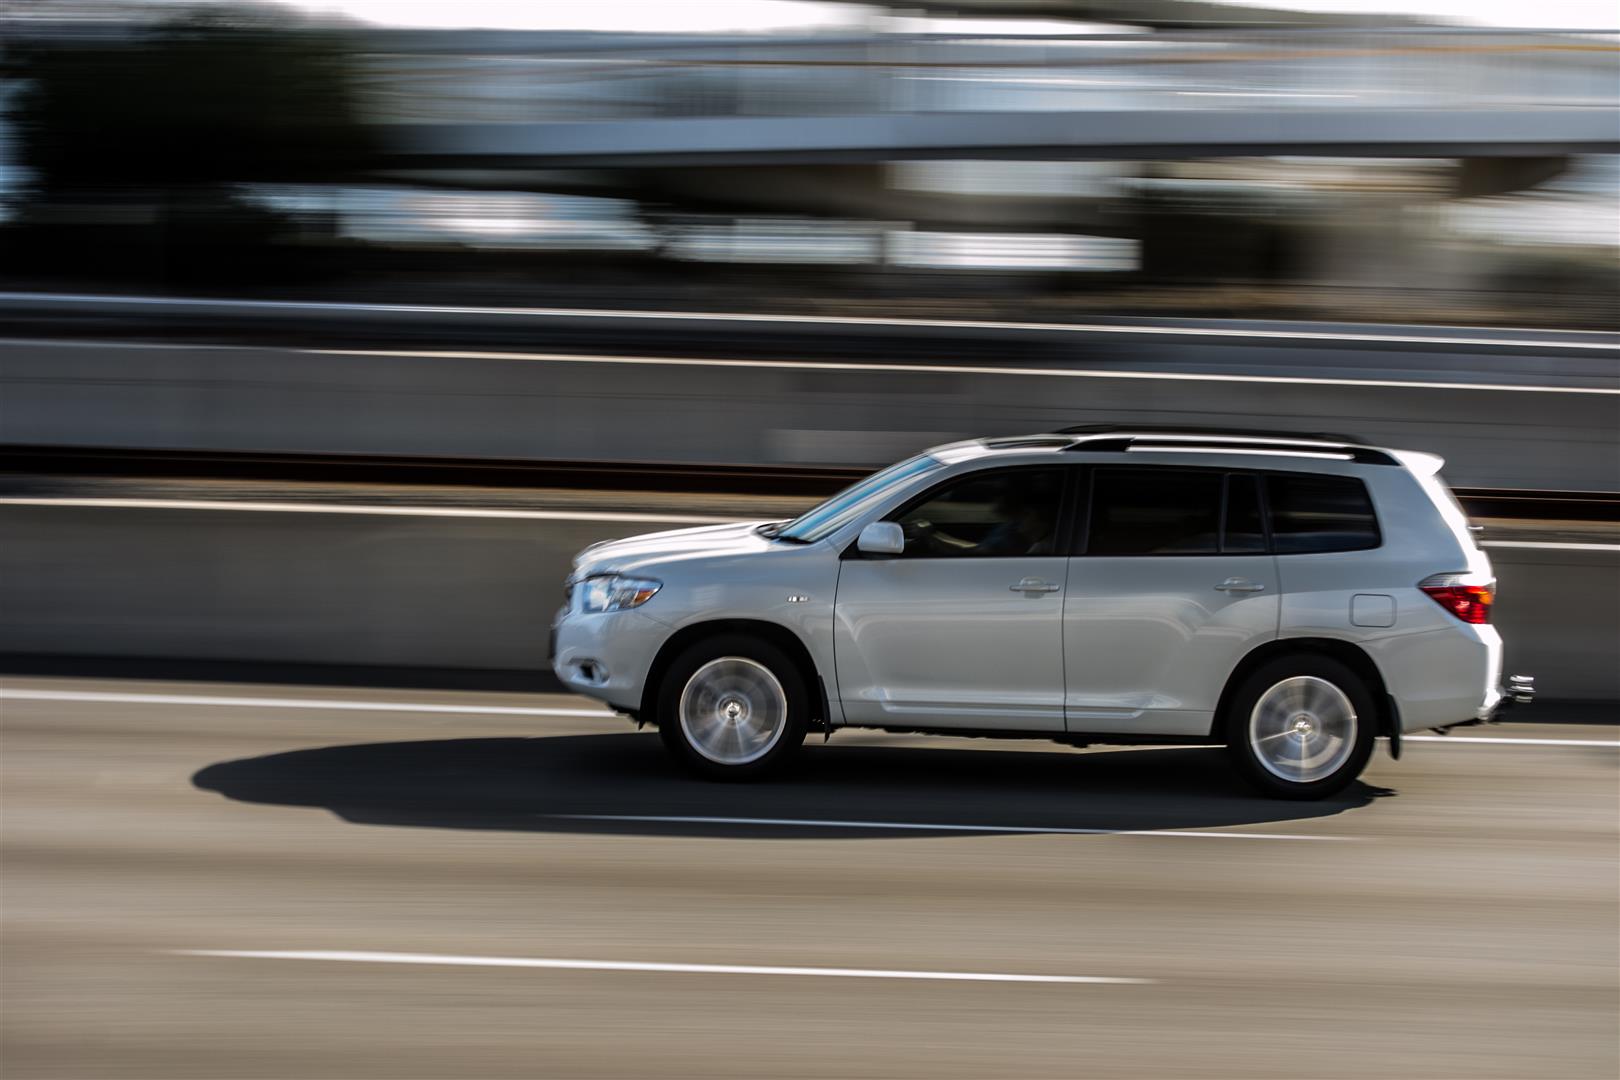 Toyota Highlander Service and Repair in Fremont - Fremont Auto Center